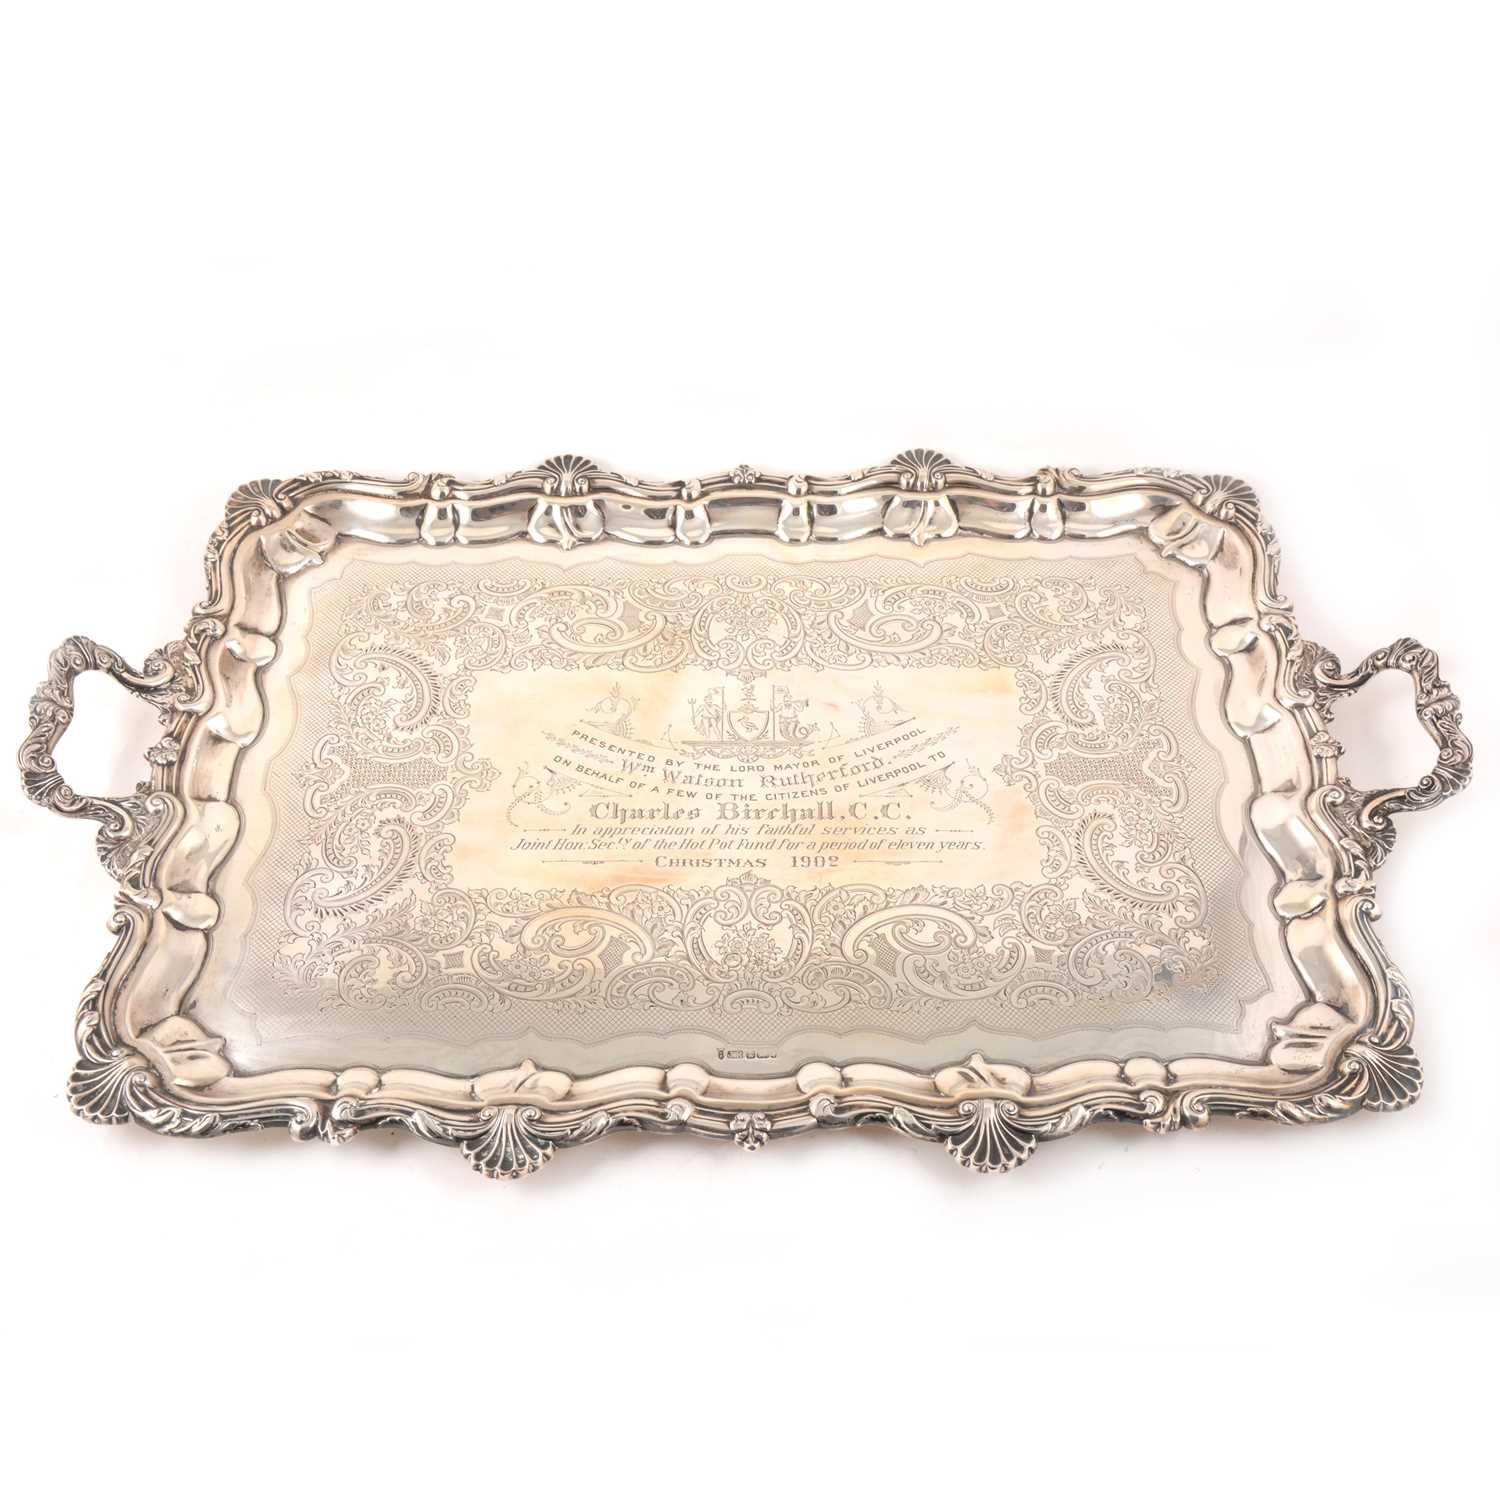 Lot 107 - A large silver presentation tray, Joseph Rodgers & Sons, Sheffield 1901